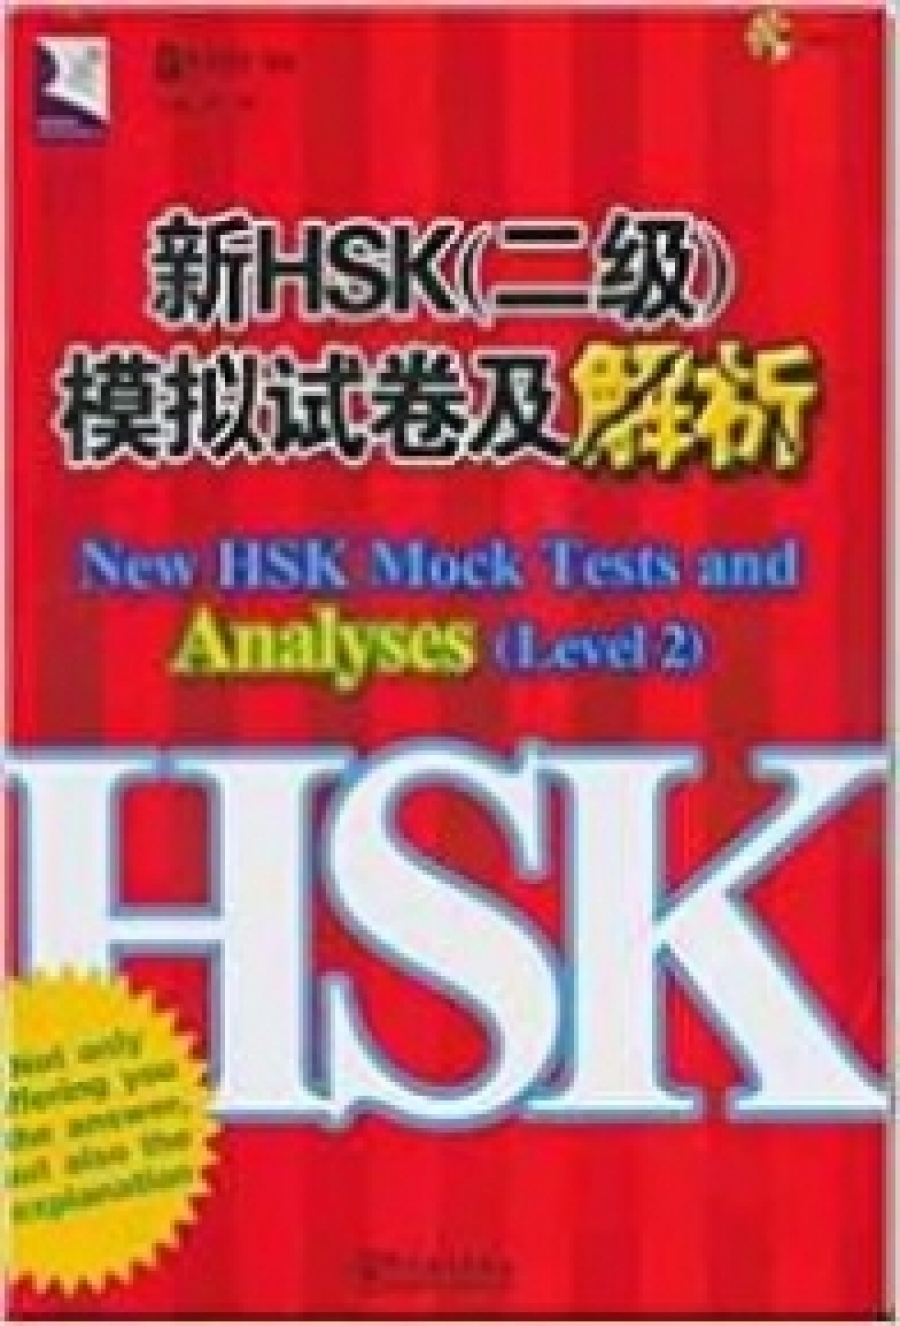 New HSK Mock Tests and Analyses 2+ CD 